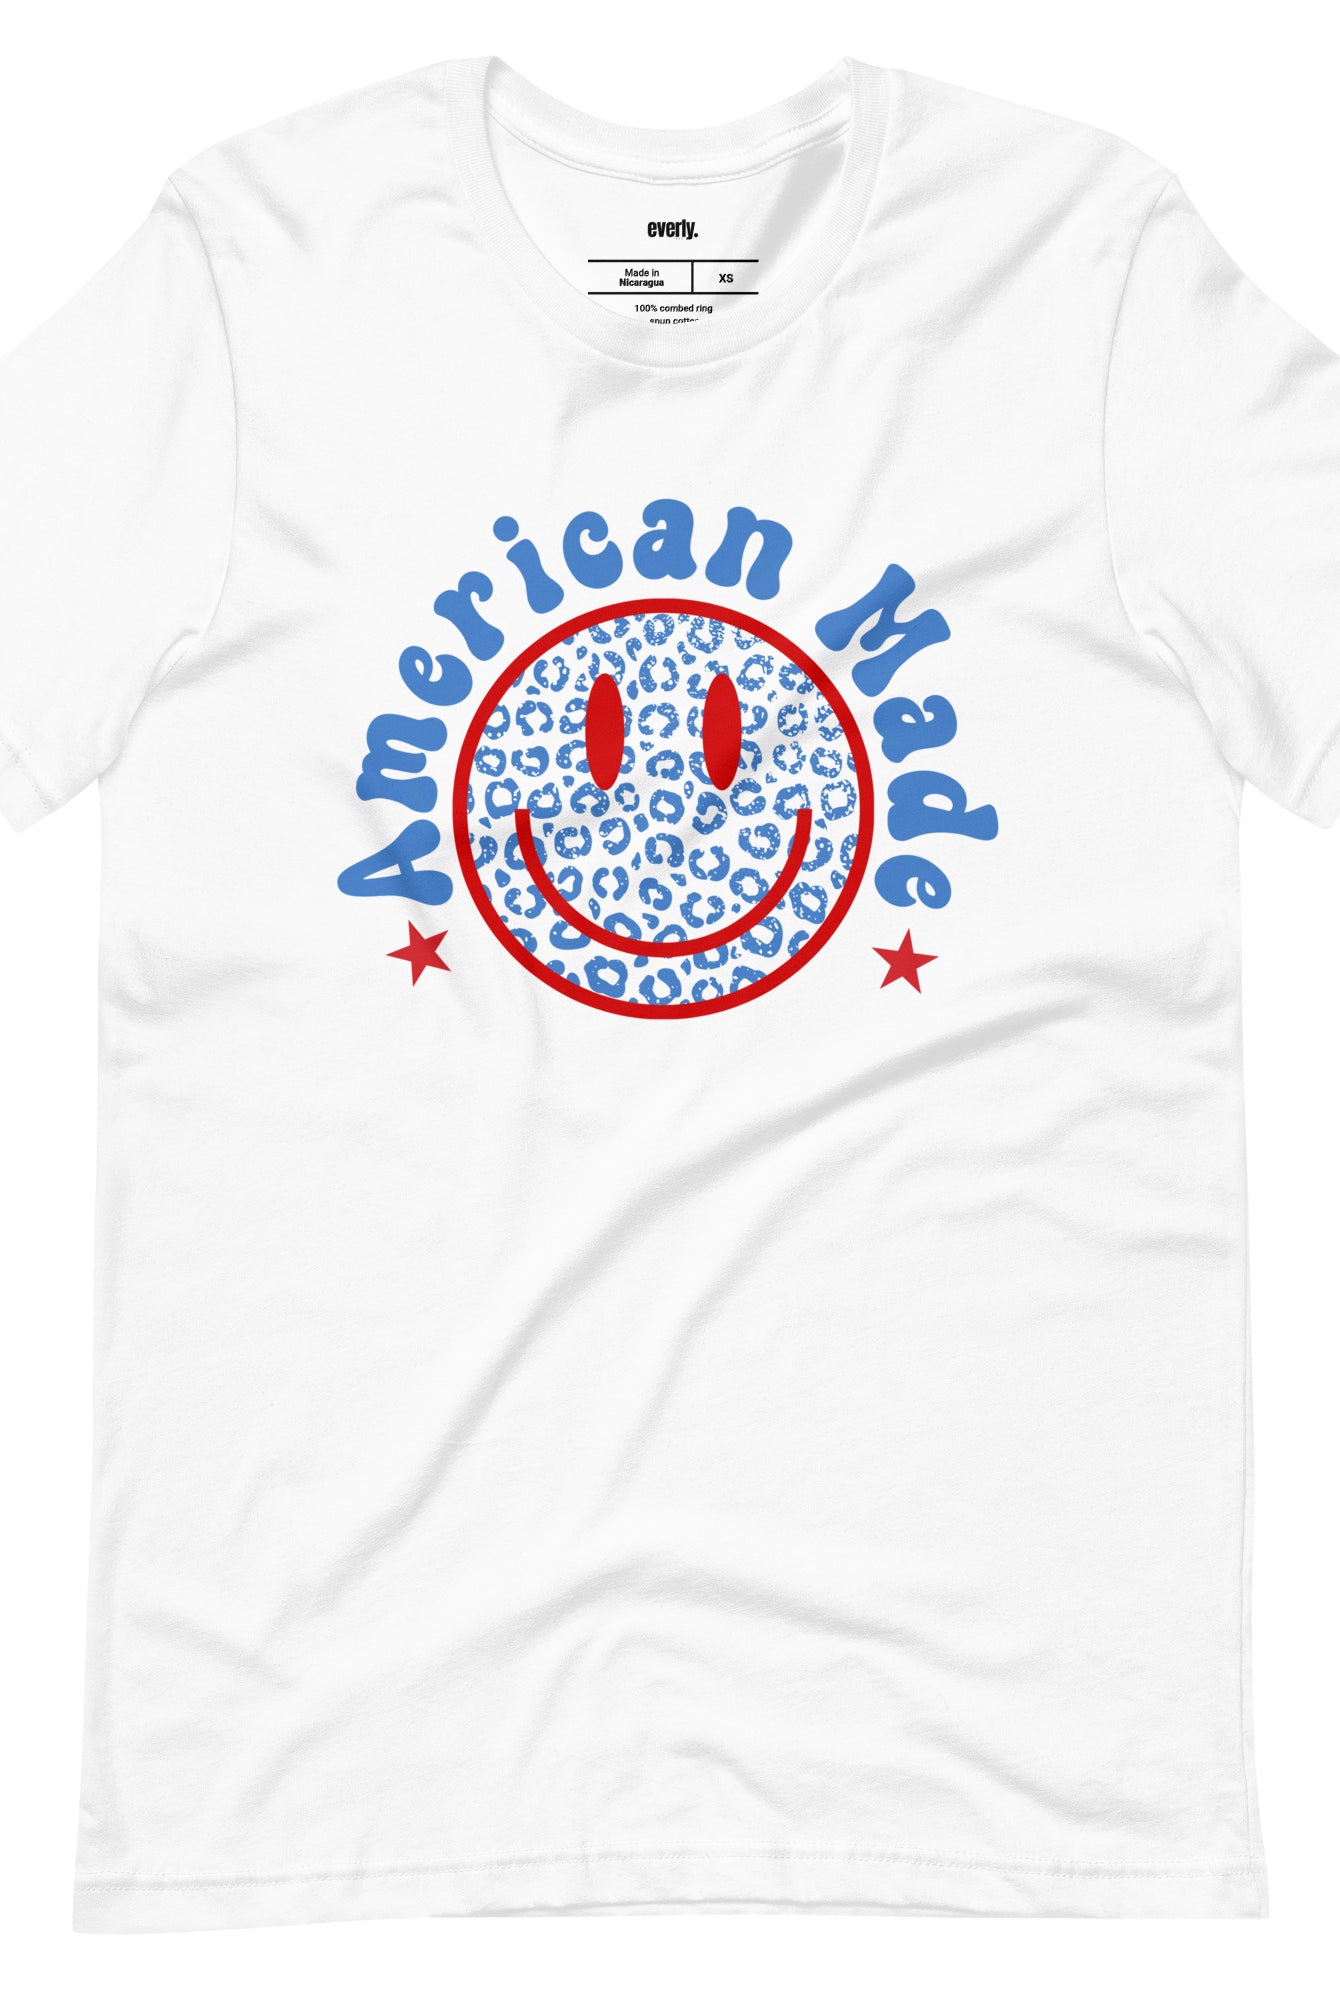 Close-up image of a USA July 4th graphic tee featuring the words 'American Made' surrounded by retro lettering around a bold blue cheetah print retro smiley face on the front. A playful and unique design perfect for celebrating July 4th in style on white graphic tee.